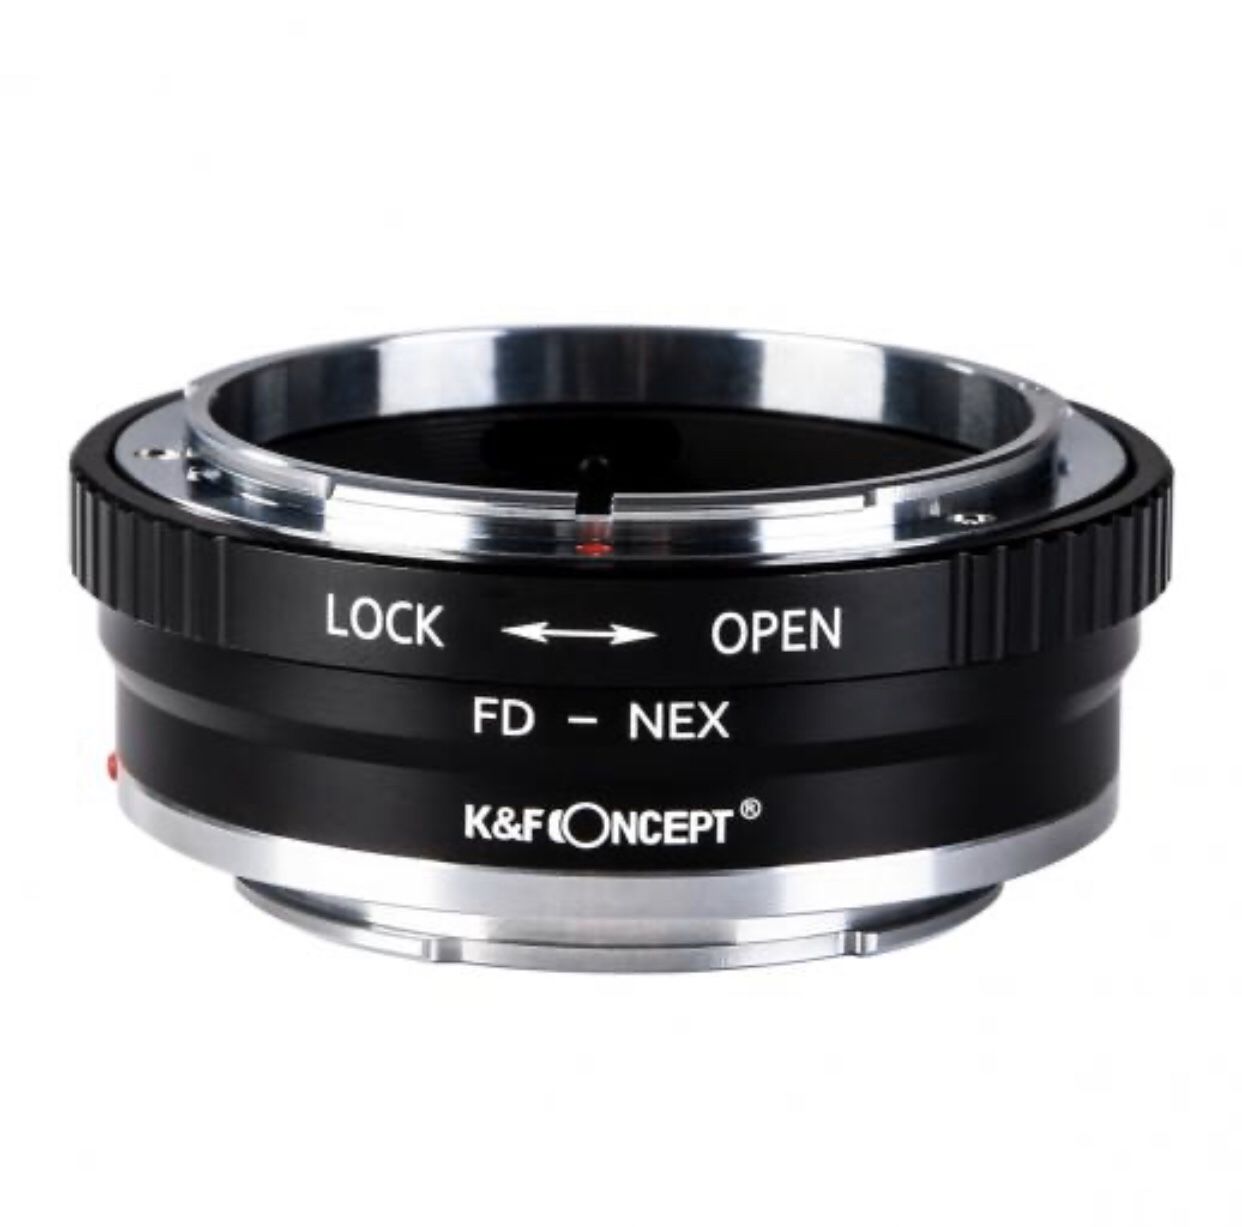 New K&F Concept lens adapter - Canon FD to NEX SONY MIRRORLESS CAMERA - video - dslr